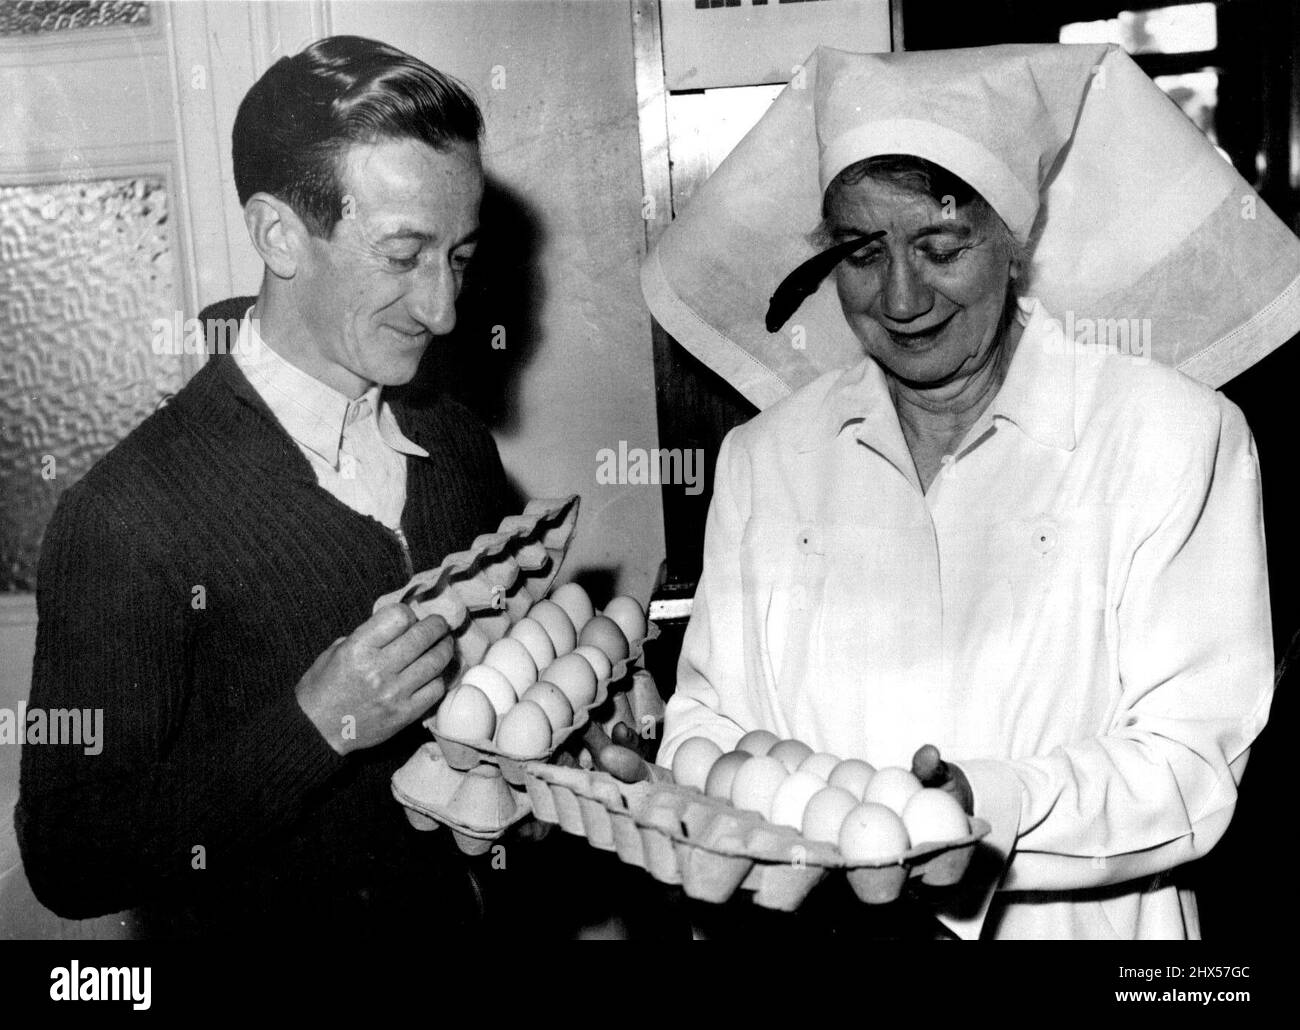 Jack Purtell Makes an Early Delivery - First in - Jockey Jack Purtell wears his winning smile as he hands over eggs to Matron E. Schafar at the Queen Victoria Hospital on his way home to Mentone from Flemington, tracks today. Purtell hopes that all sportsmen will aid the hospital's egg appeal. September 28, 1954. Stock Photo